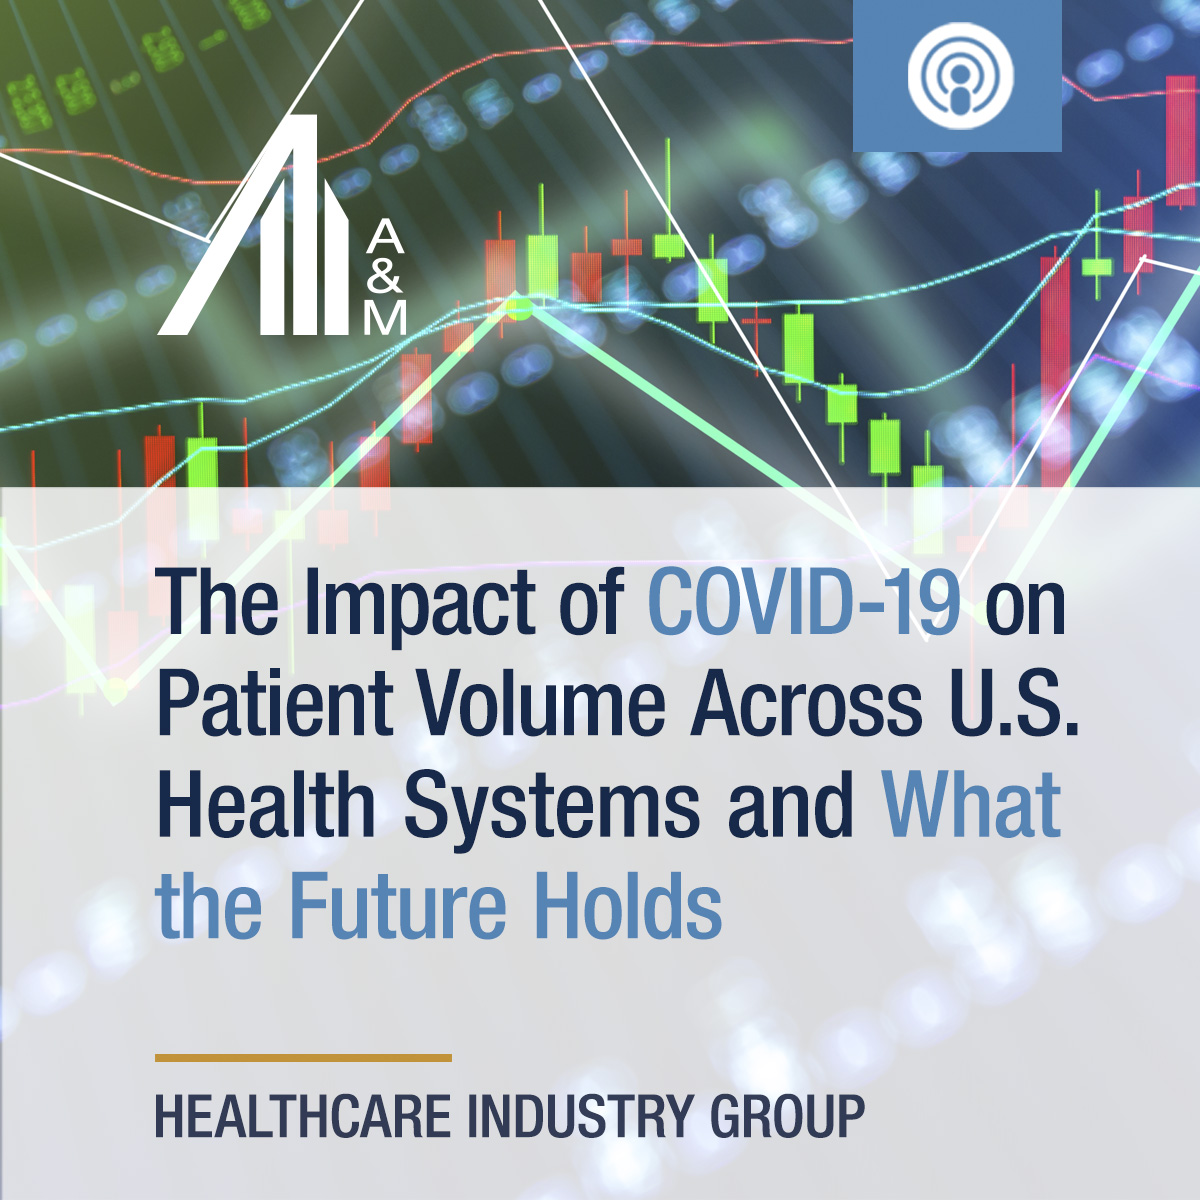 The Impact of COVID-19 on Patient Volume Across U.S. Health Systems & What the Future Holds - Part II